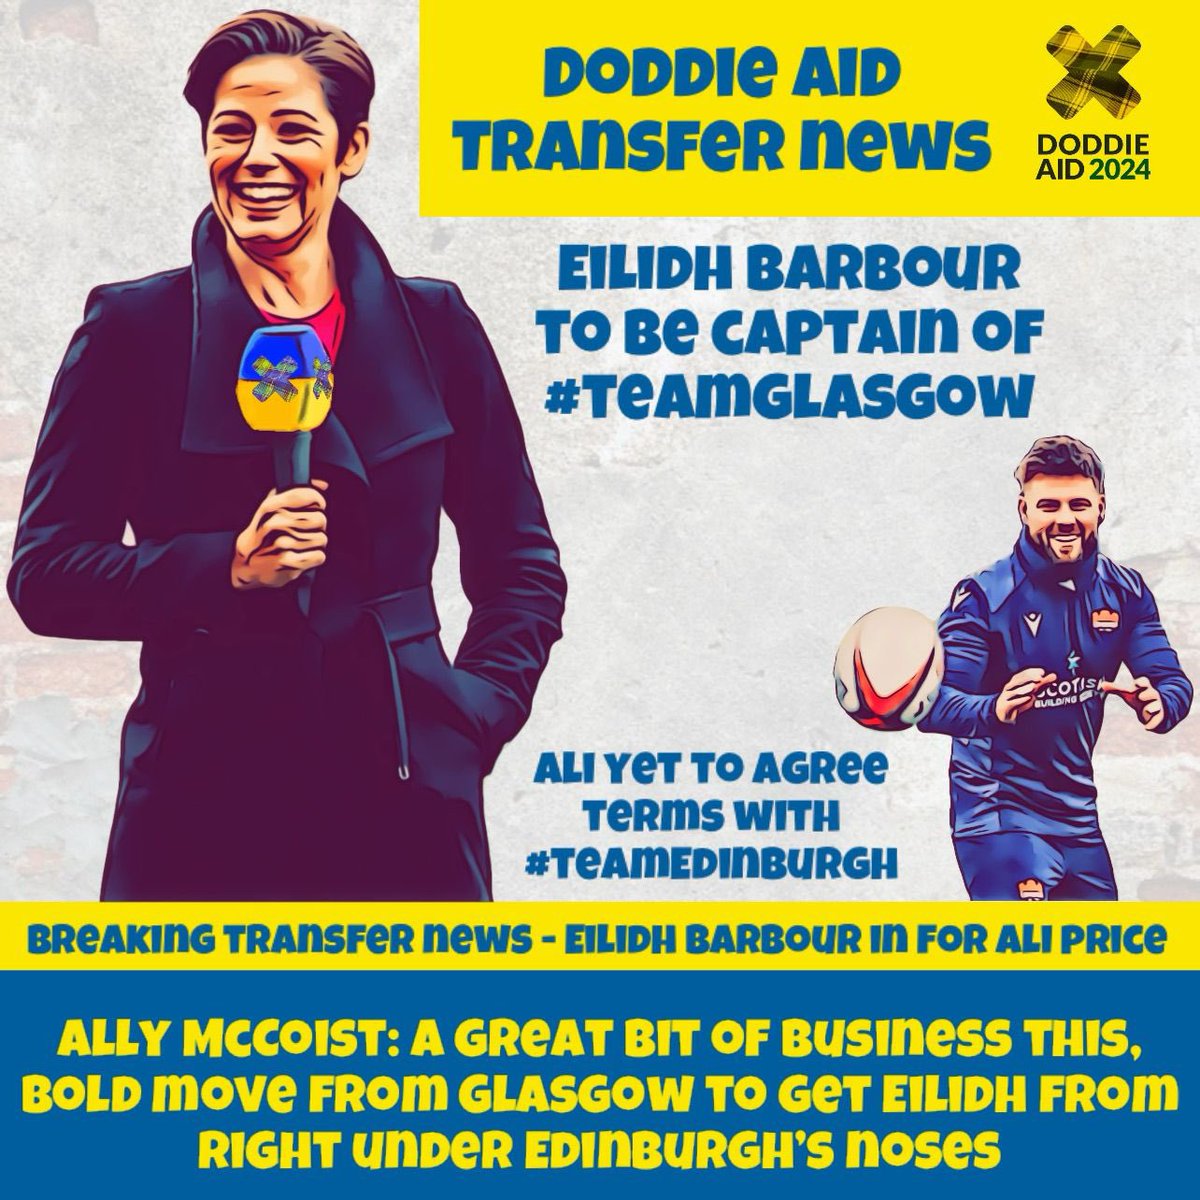 It’ll top anything that happens in the January window, welcome the one and only #EilidhBarbour to #TeamGlasgow 🙌🏻 

#DoddieAid #DoddieAid2024 #transfernews #newcaptain #mndawareness #mnd #doitfordoddie